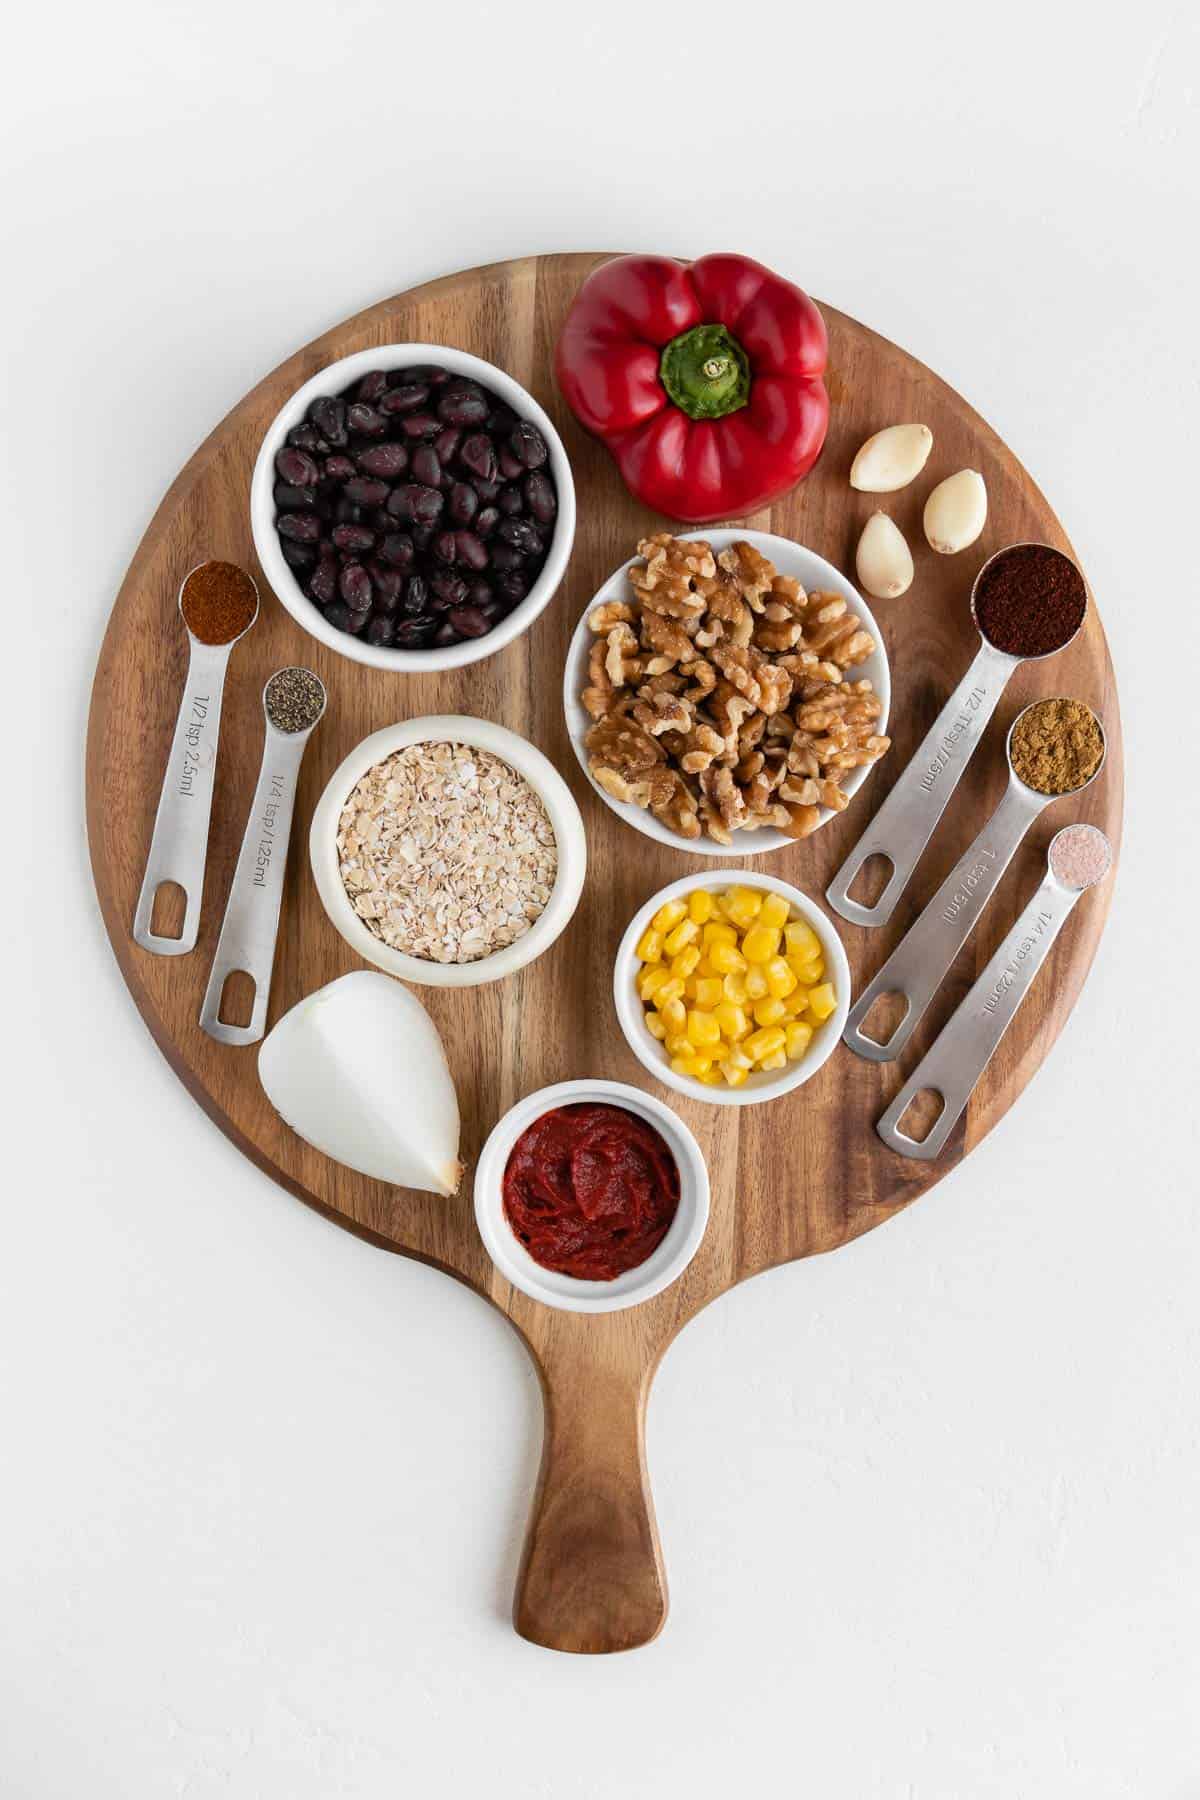 a round wooden cutting board topped with beans, corn, oats, walnuts, red bell pepper, garlic, onion, and spices